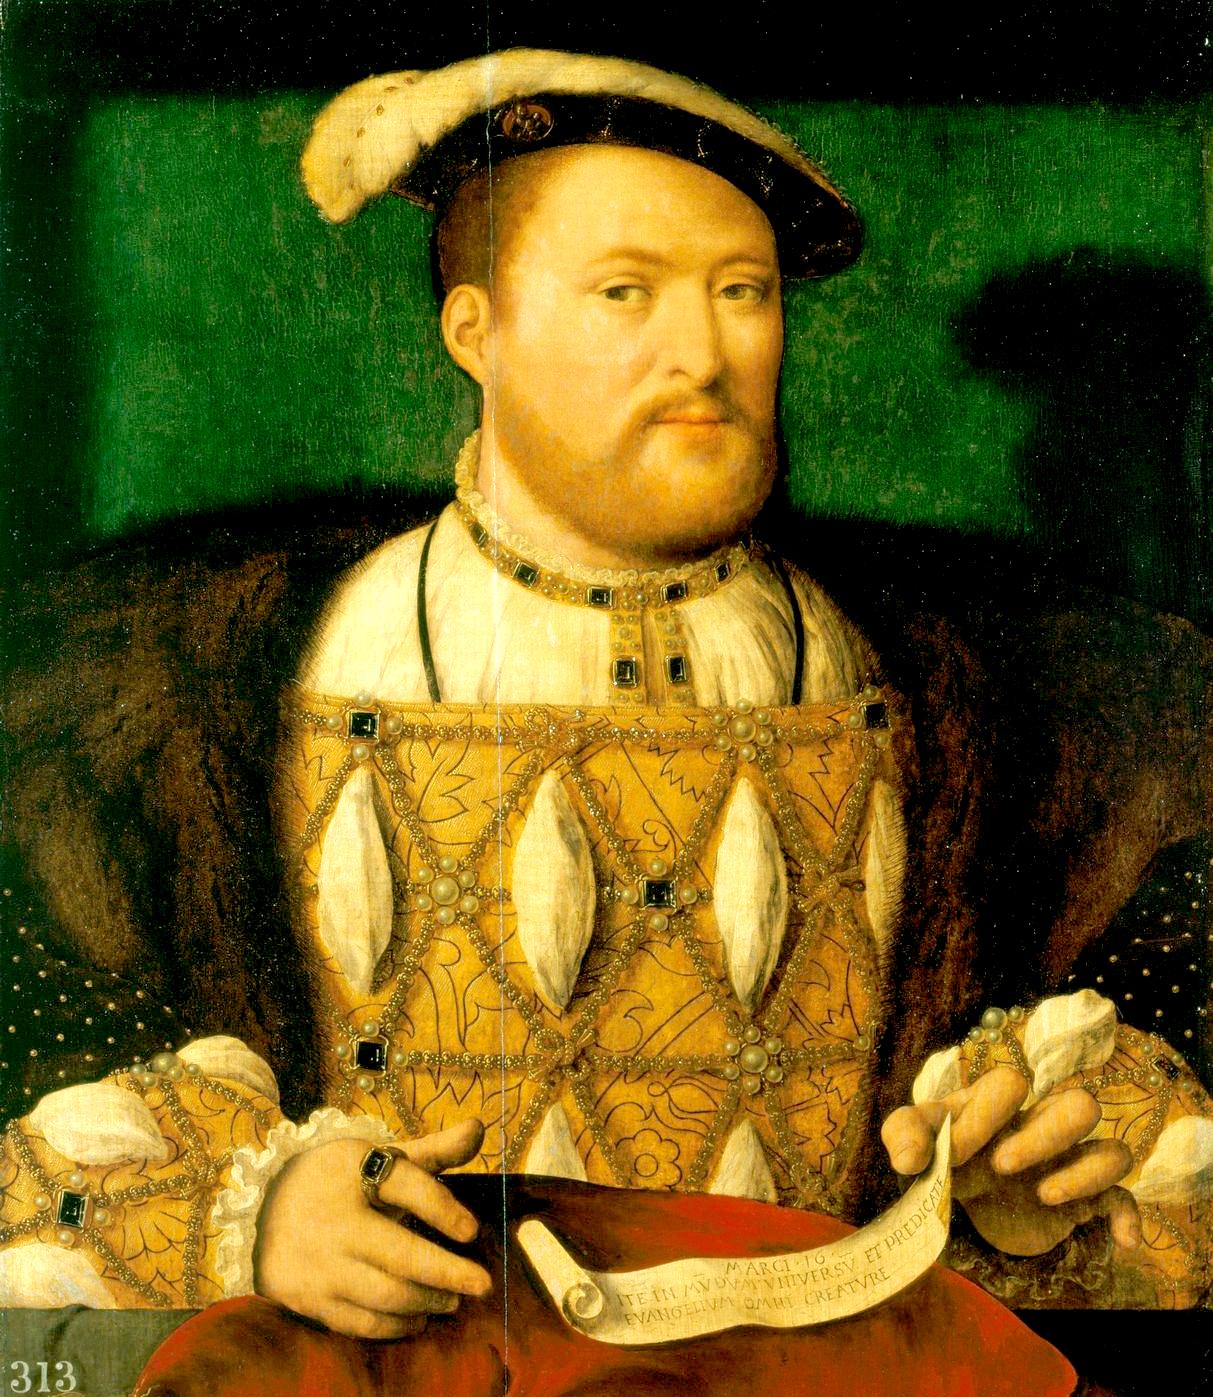 Henry VIII portrait from 1491, the King is famous for his beheadings